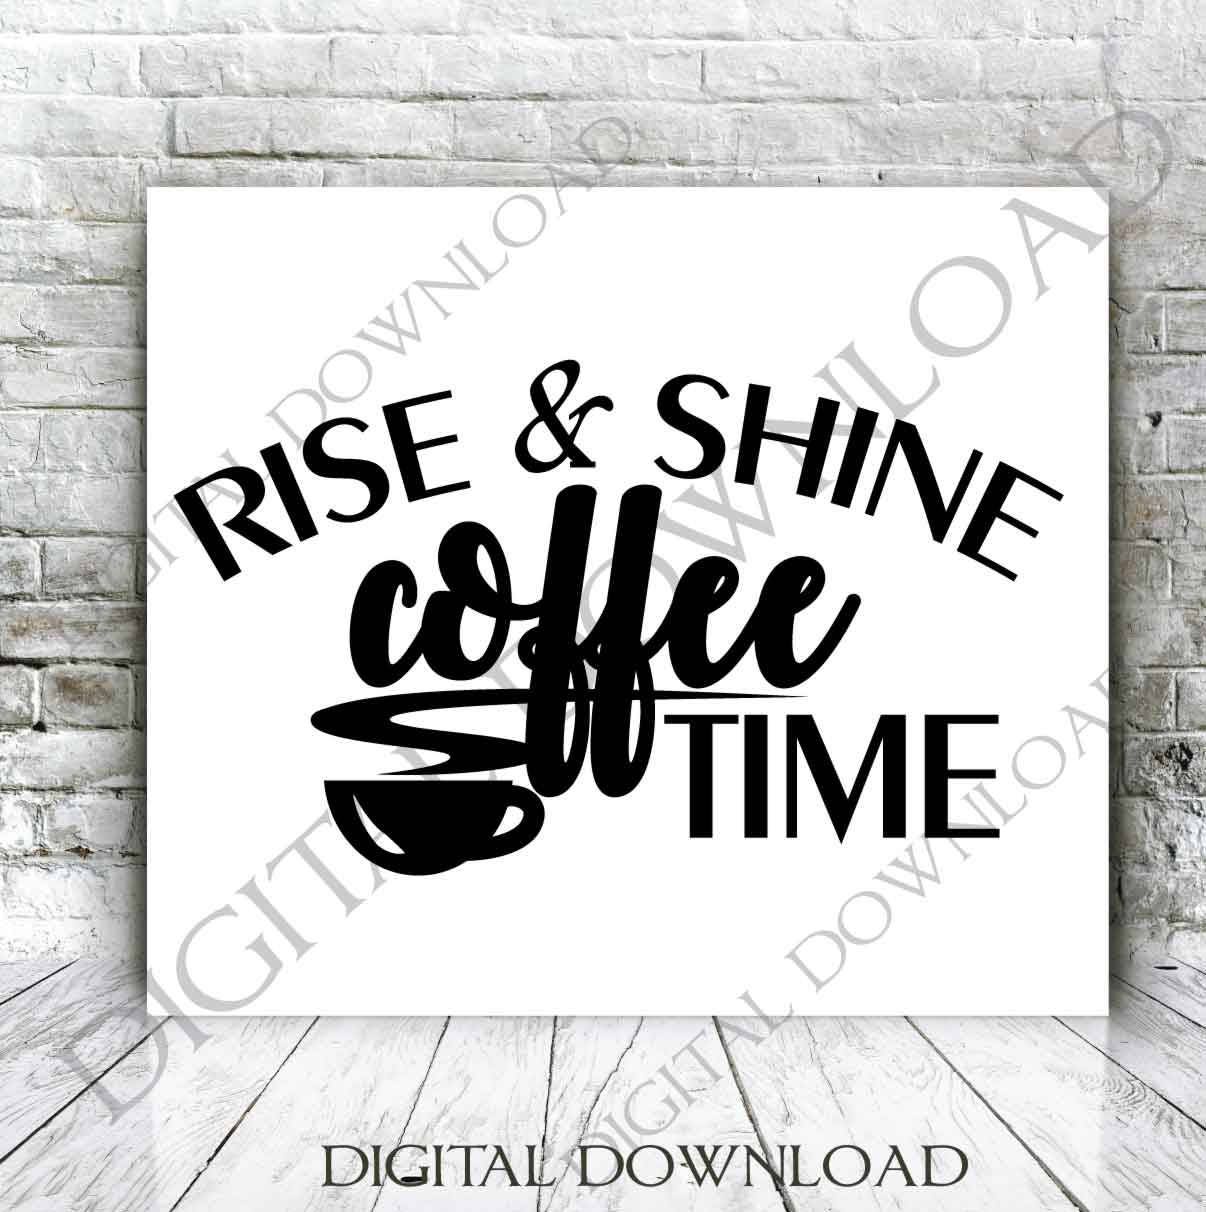 Download Rise and shine coffee time Design Vector Digital Download